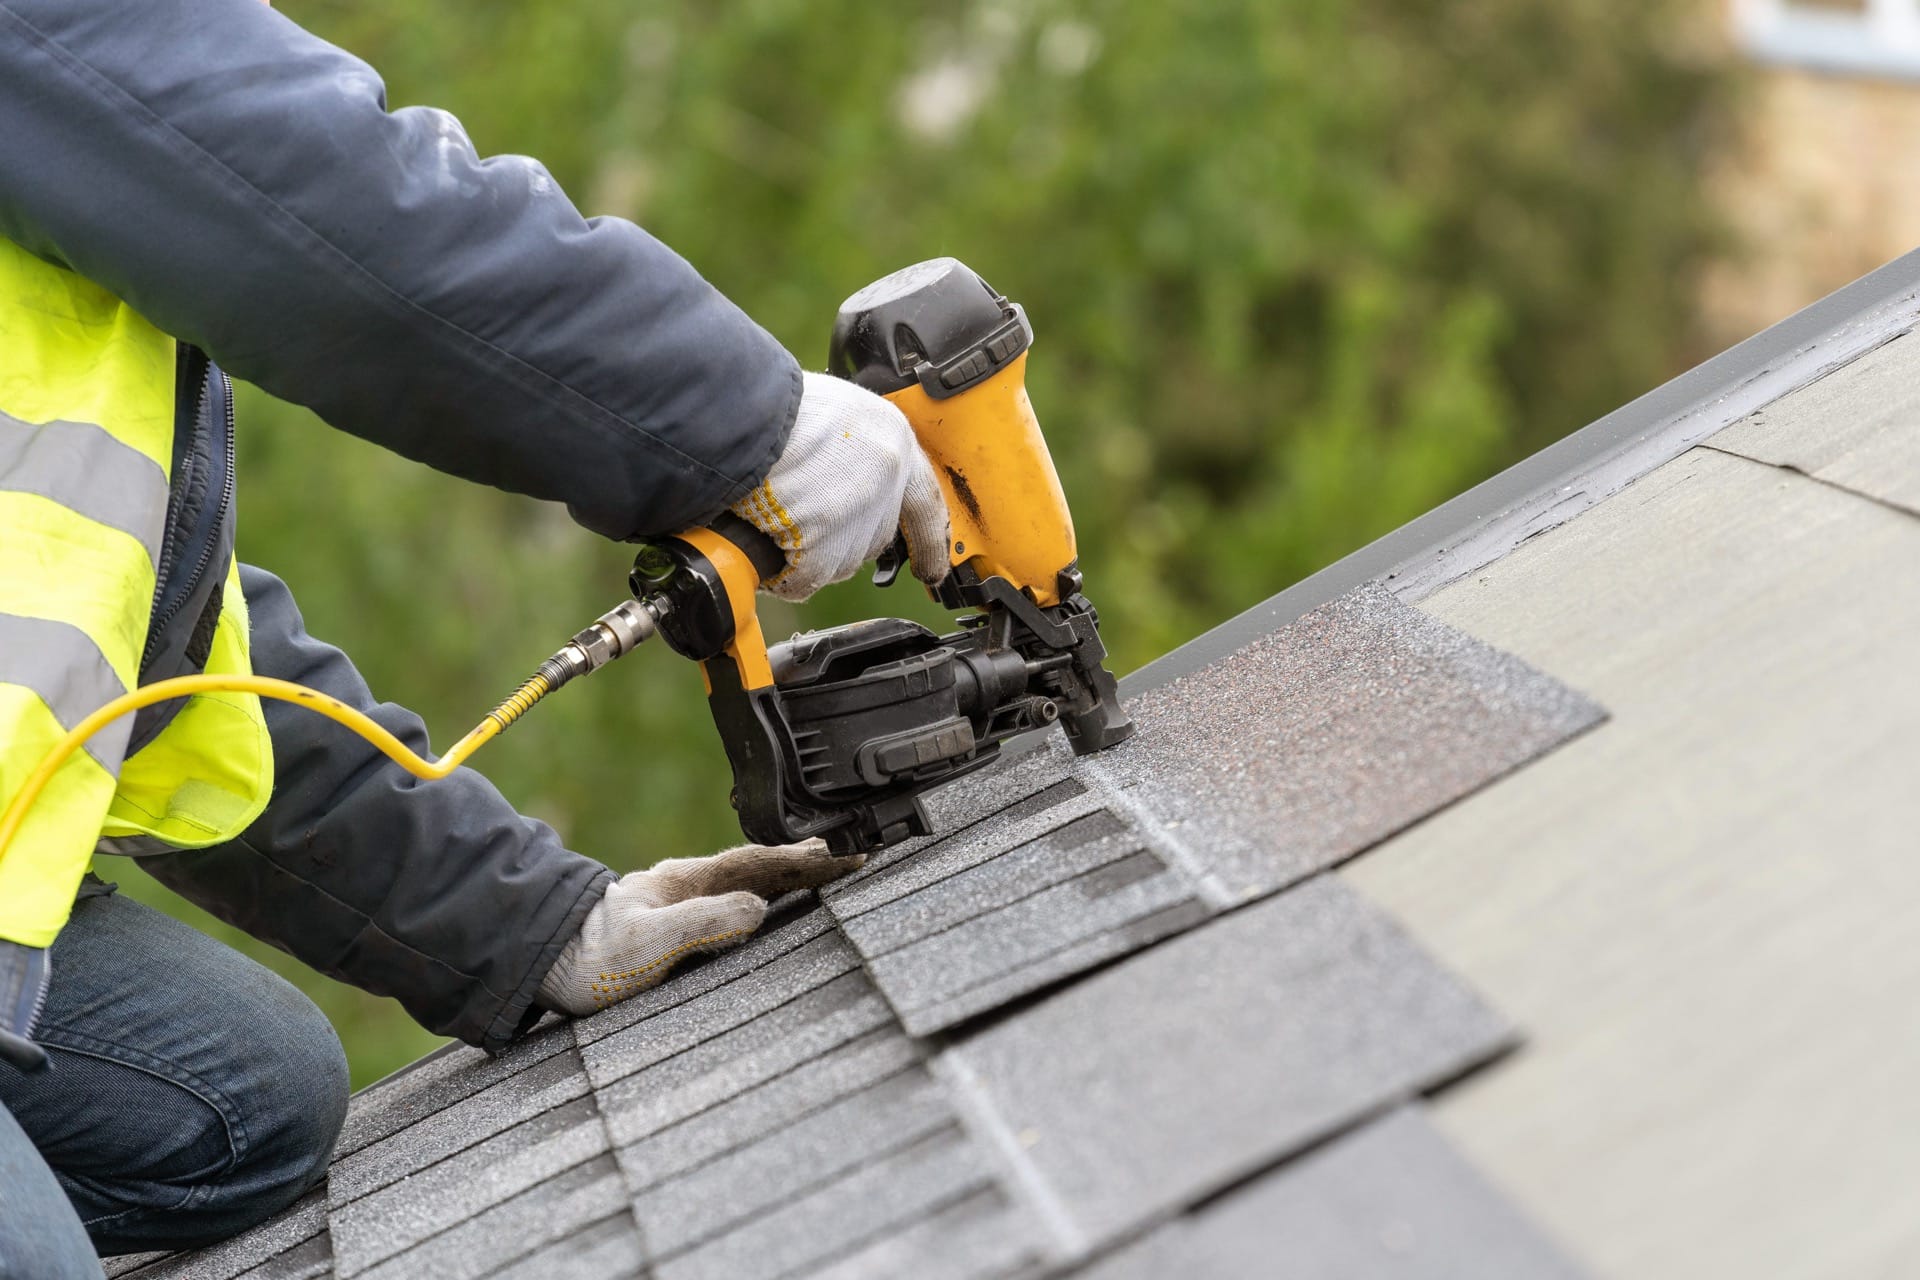 A roofer works on a roof